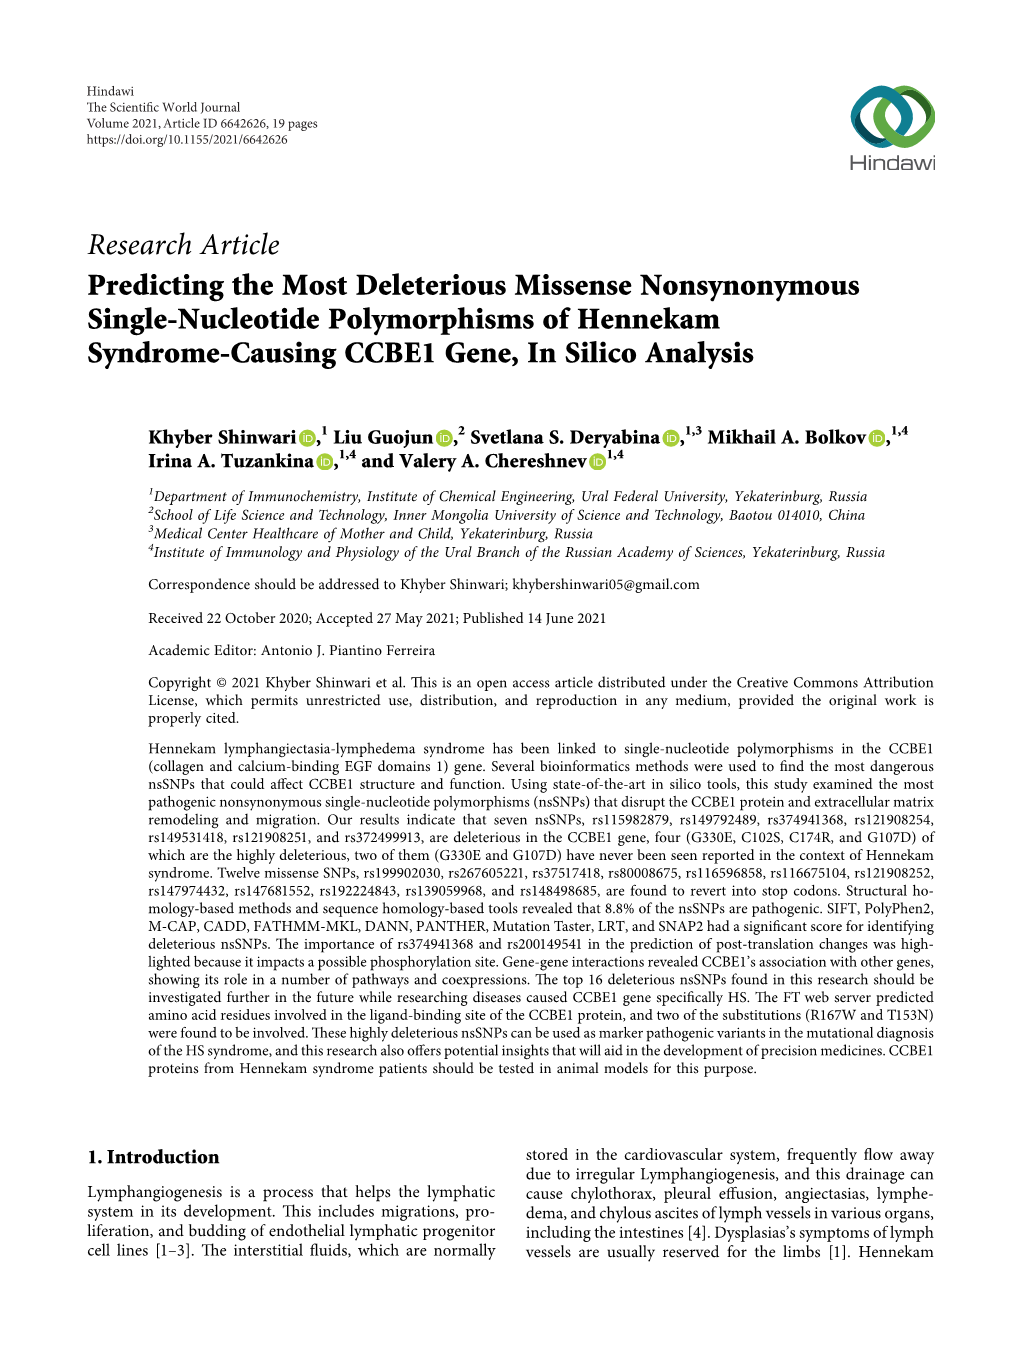 Predicting the Most Deleterious Missense Nonsynonymous Single-Nucleotide Polymorphisms of Hennekam Syndrome-Causing CCBE1 Gene, in Silico Analysis